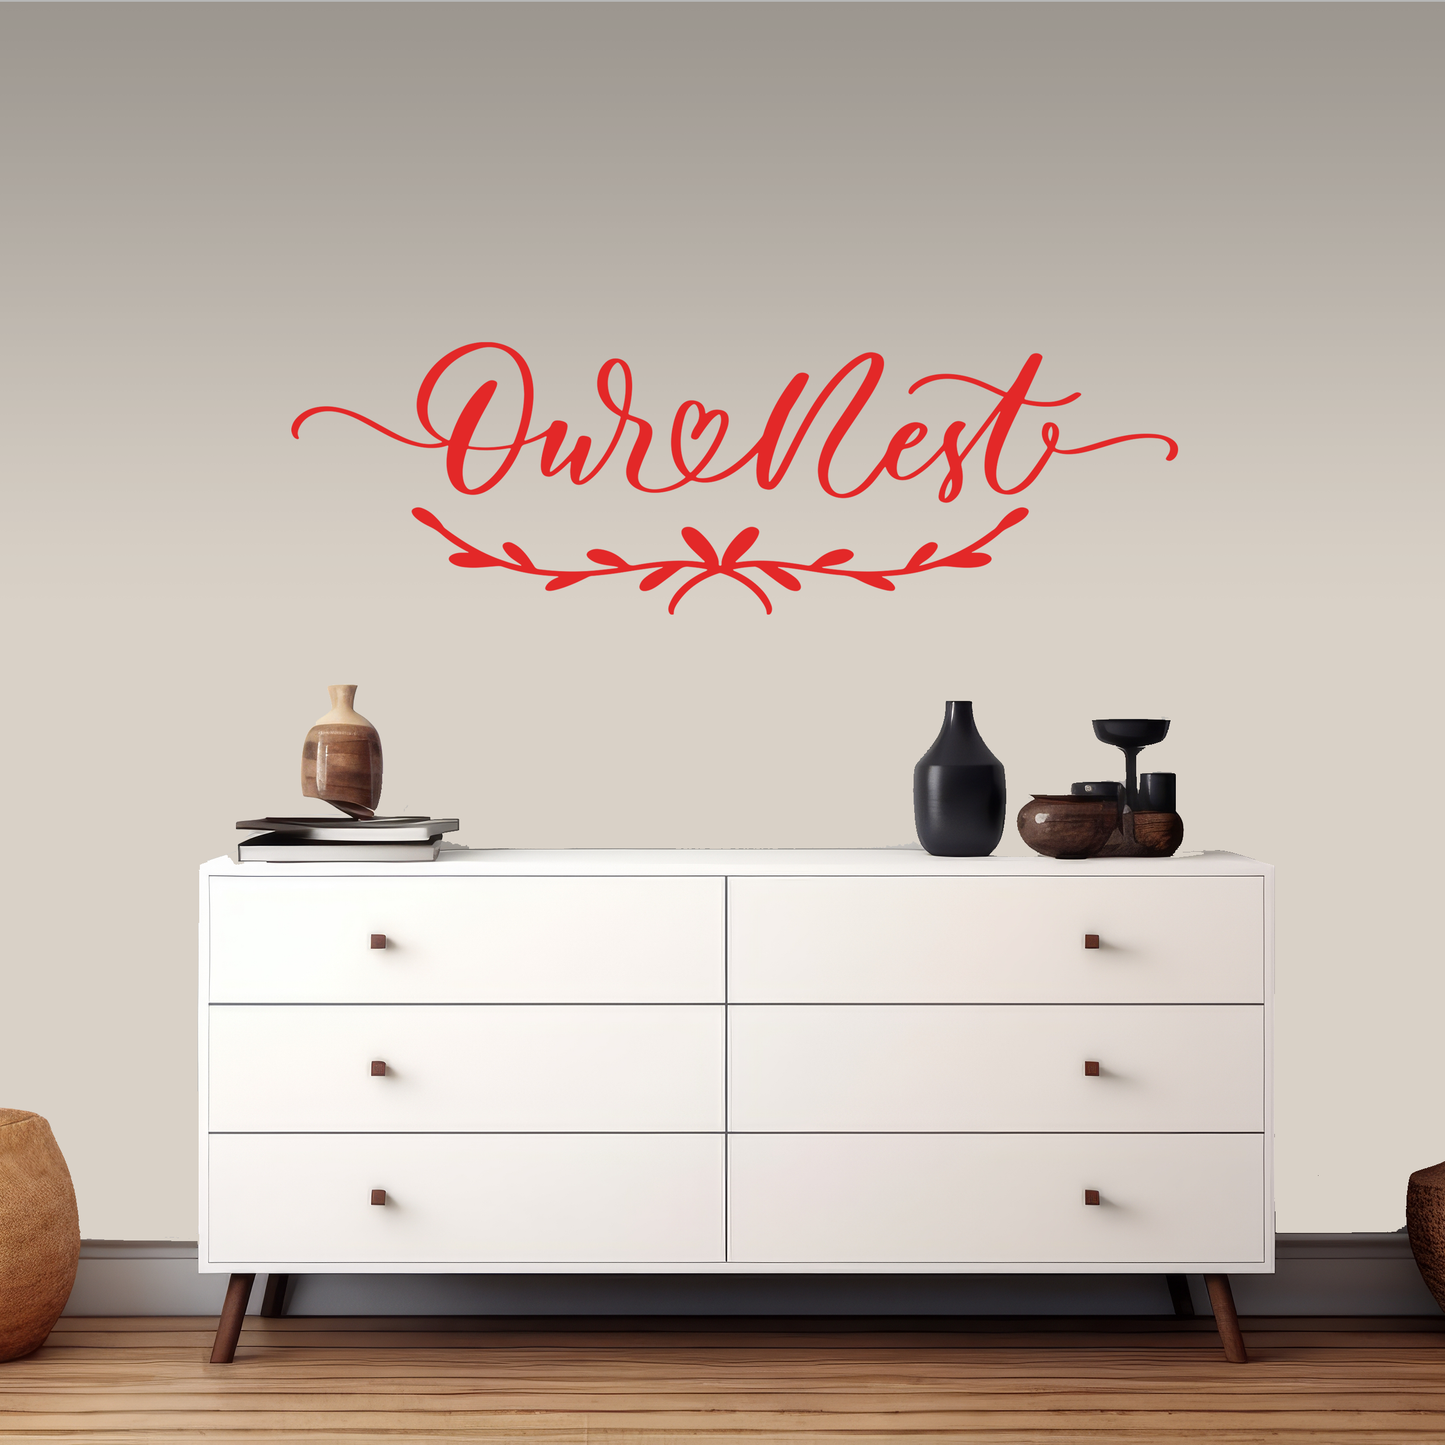 Our Nest Wall Sticker Decal